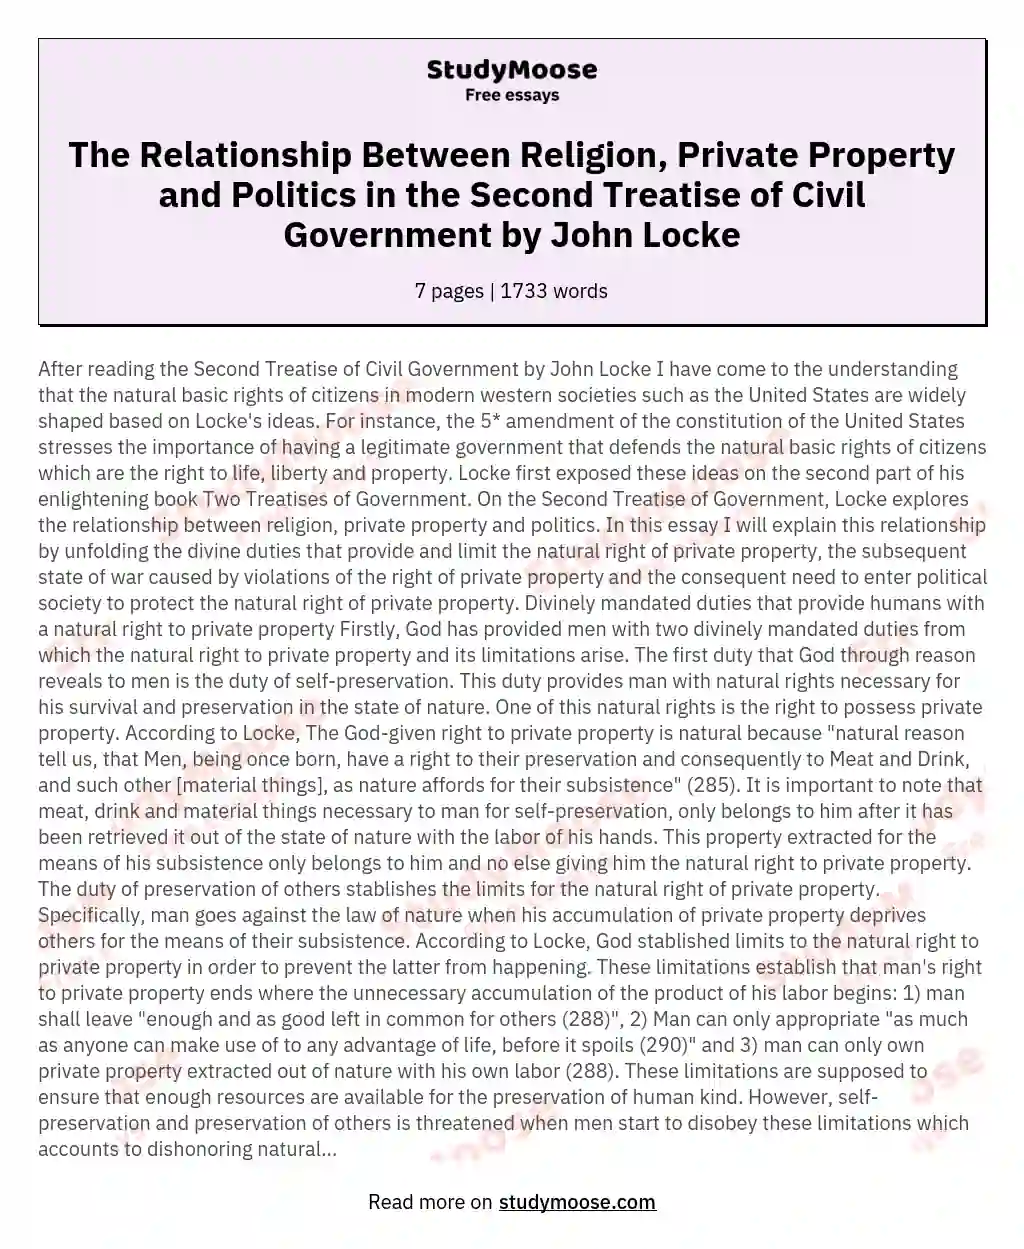 The Relationship Between Religion, Private Property and Politics in the Second Treatise of Civil Government by John Locke essay